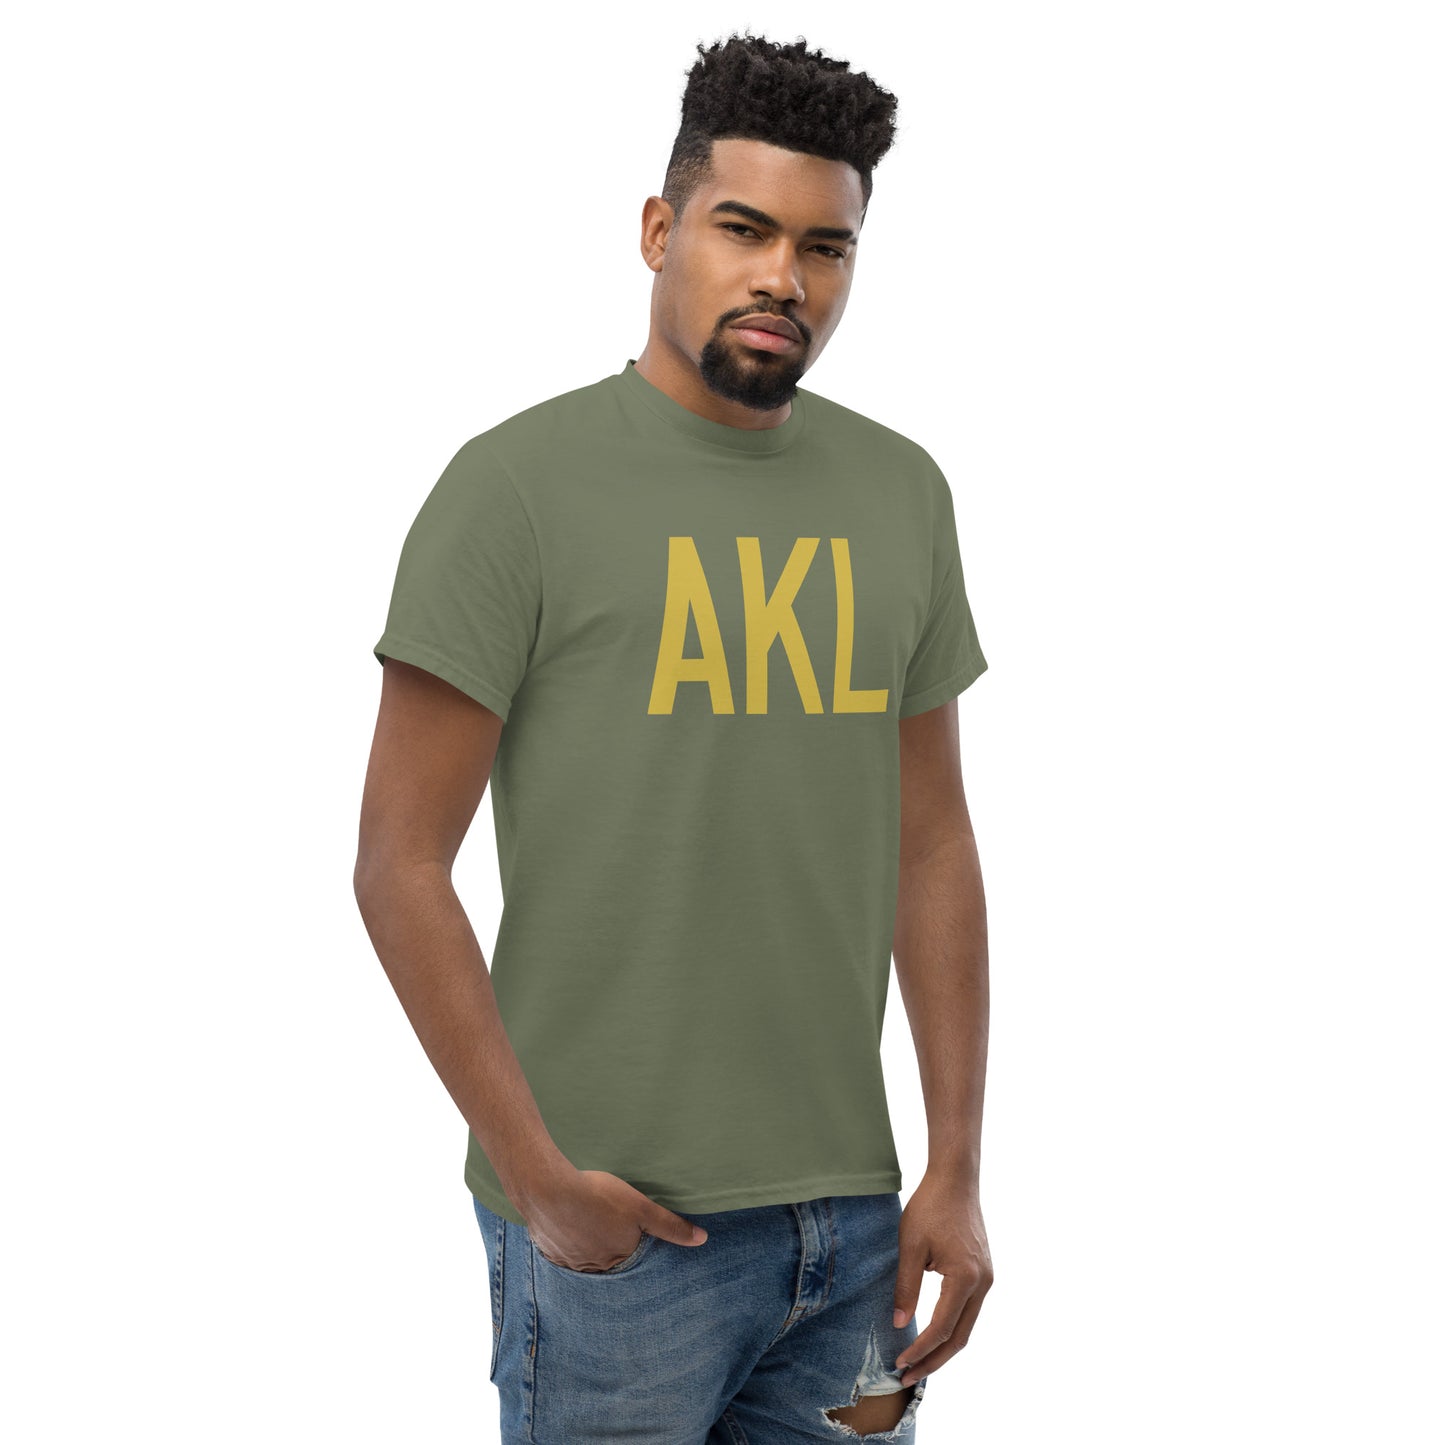 Aviation Enthusiast Men's Tee - Old Gold Graphic • AKL Auckland • YHM Designs - Image 08